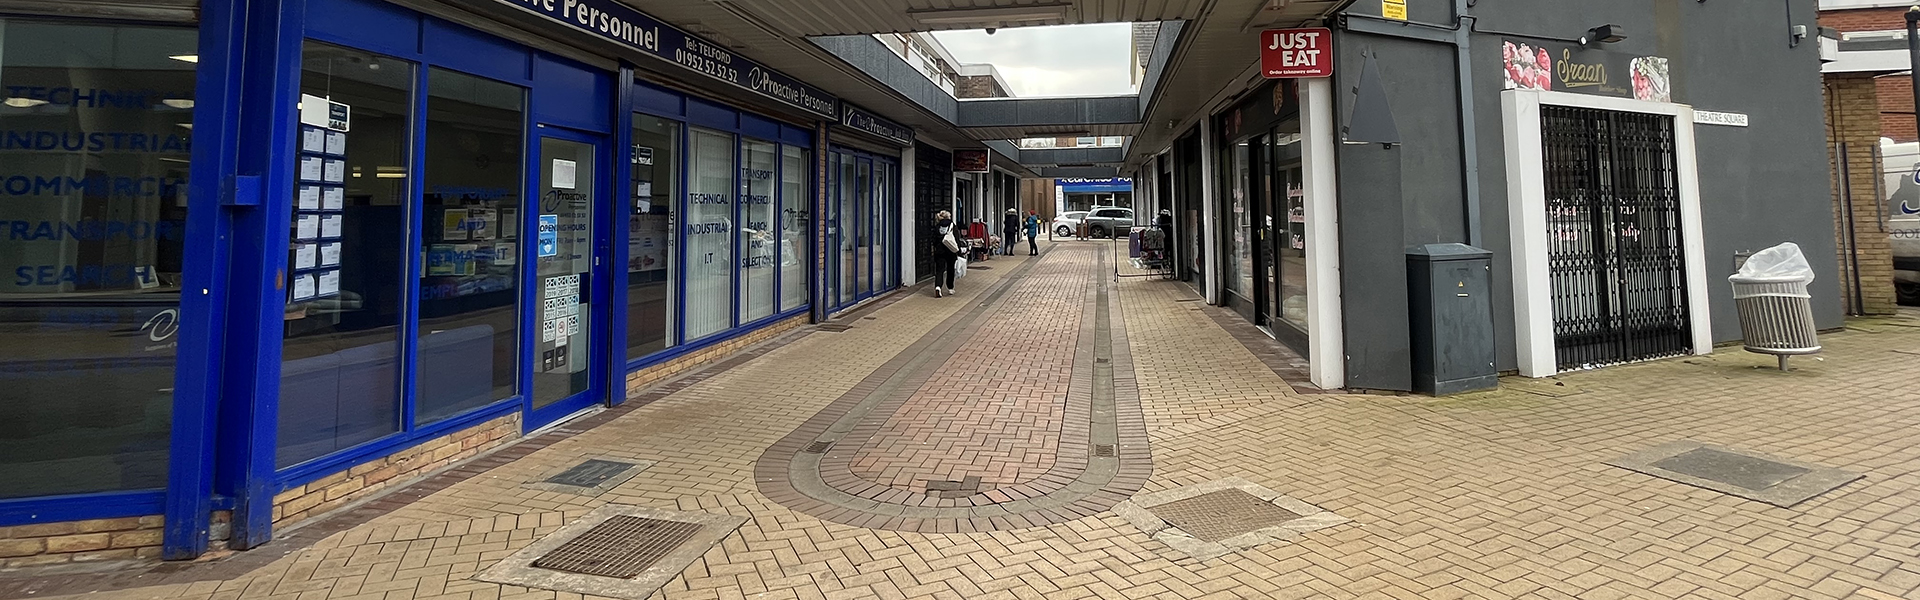 A photograph of the buildings and walkways in Oakengates Town Centre